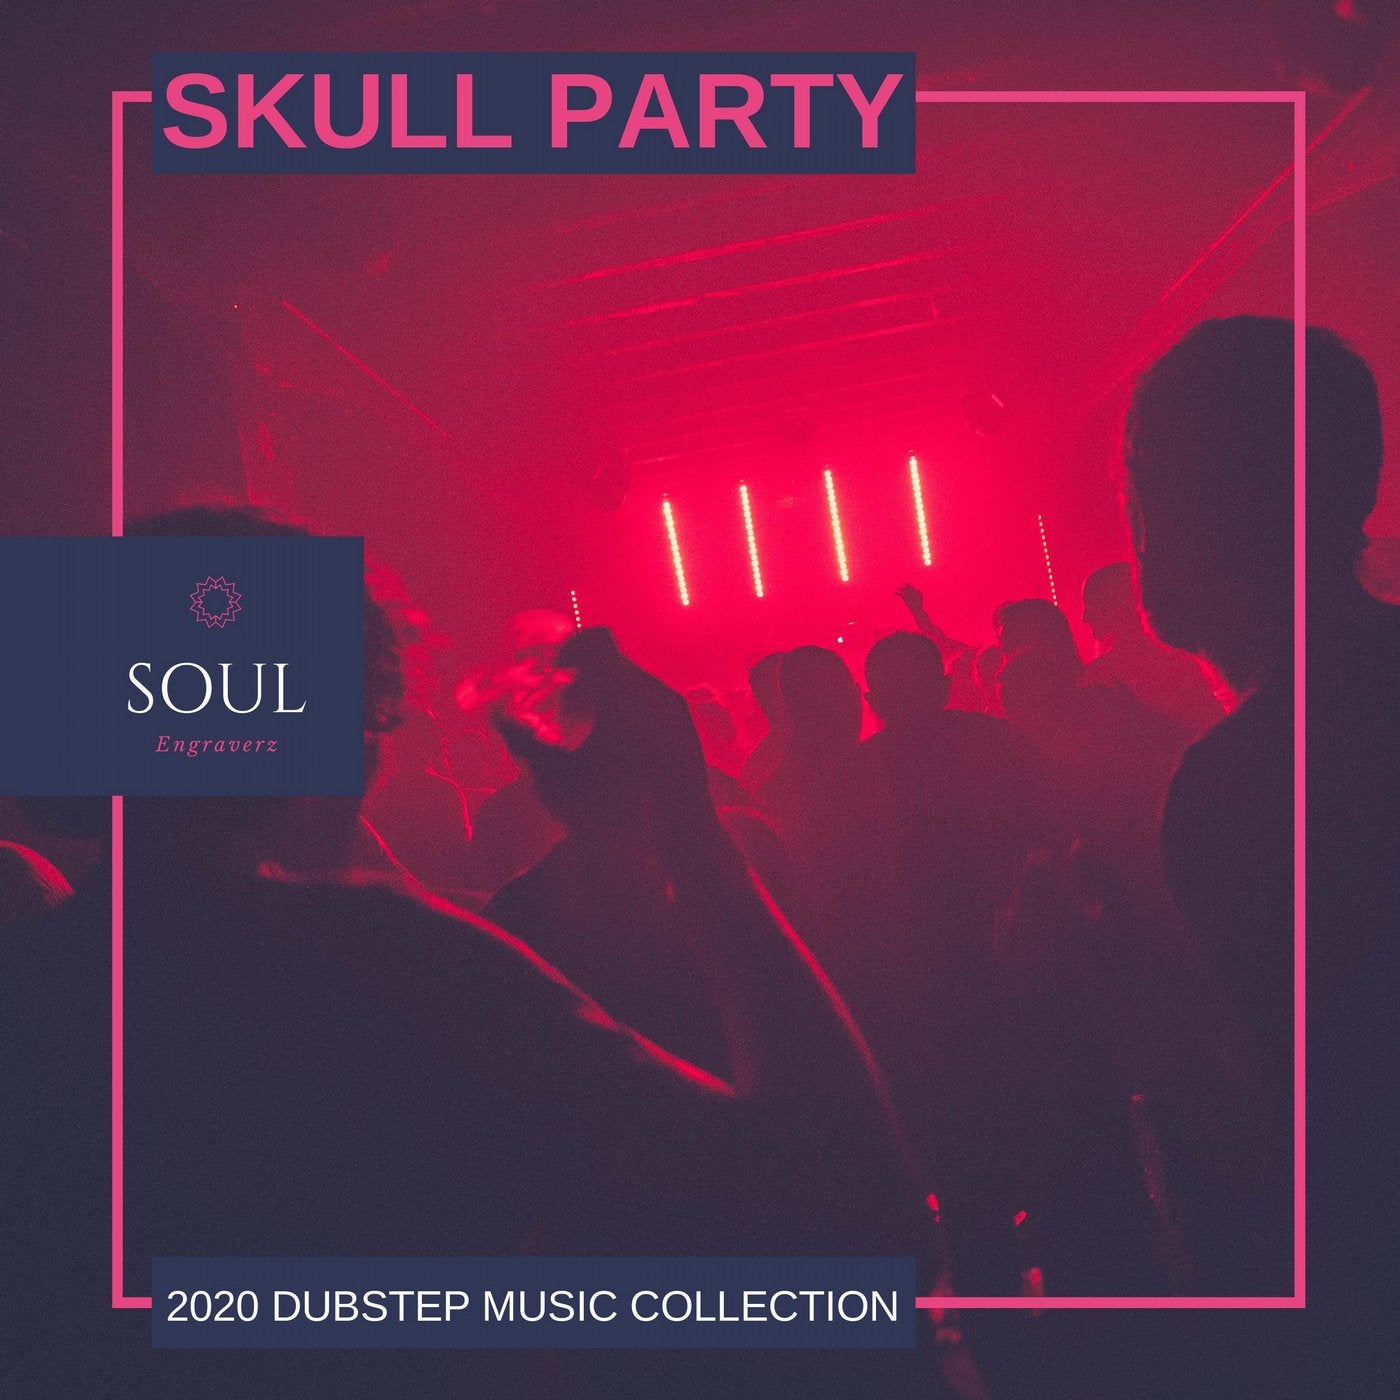 Skull Party - 2020 Dubstep Music Collection